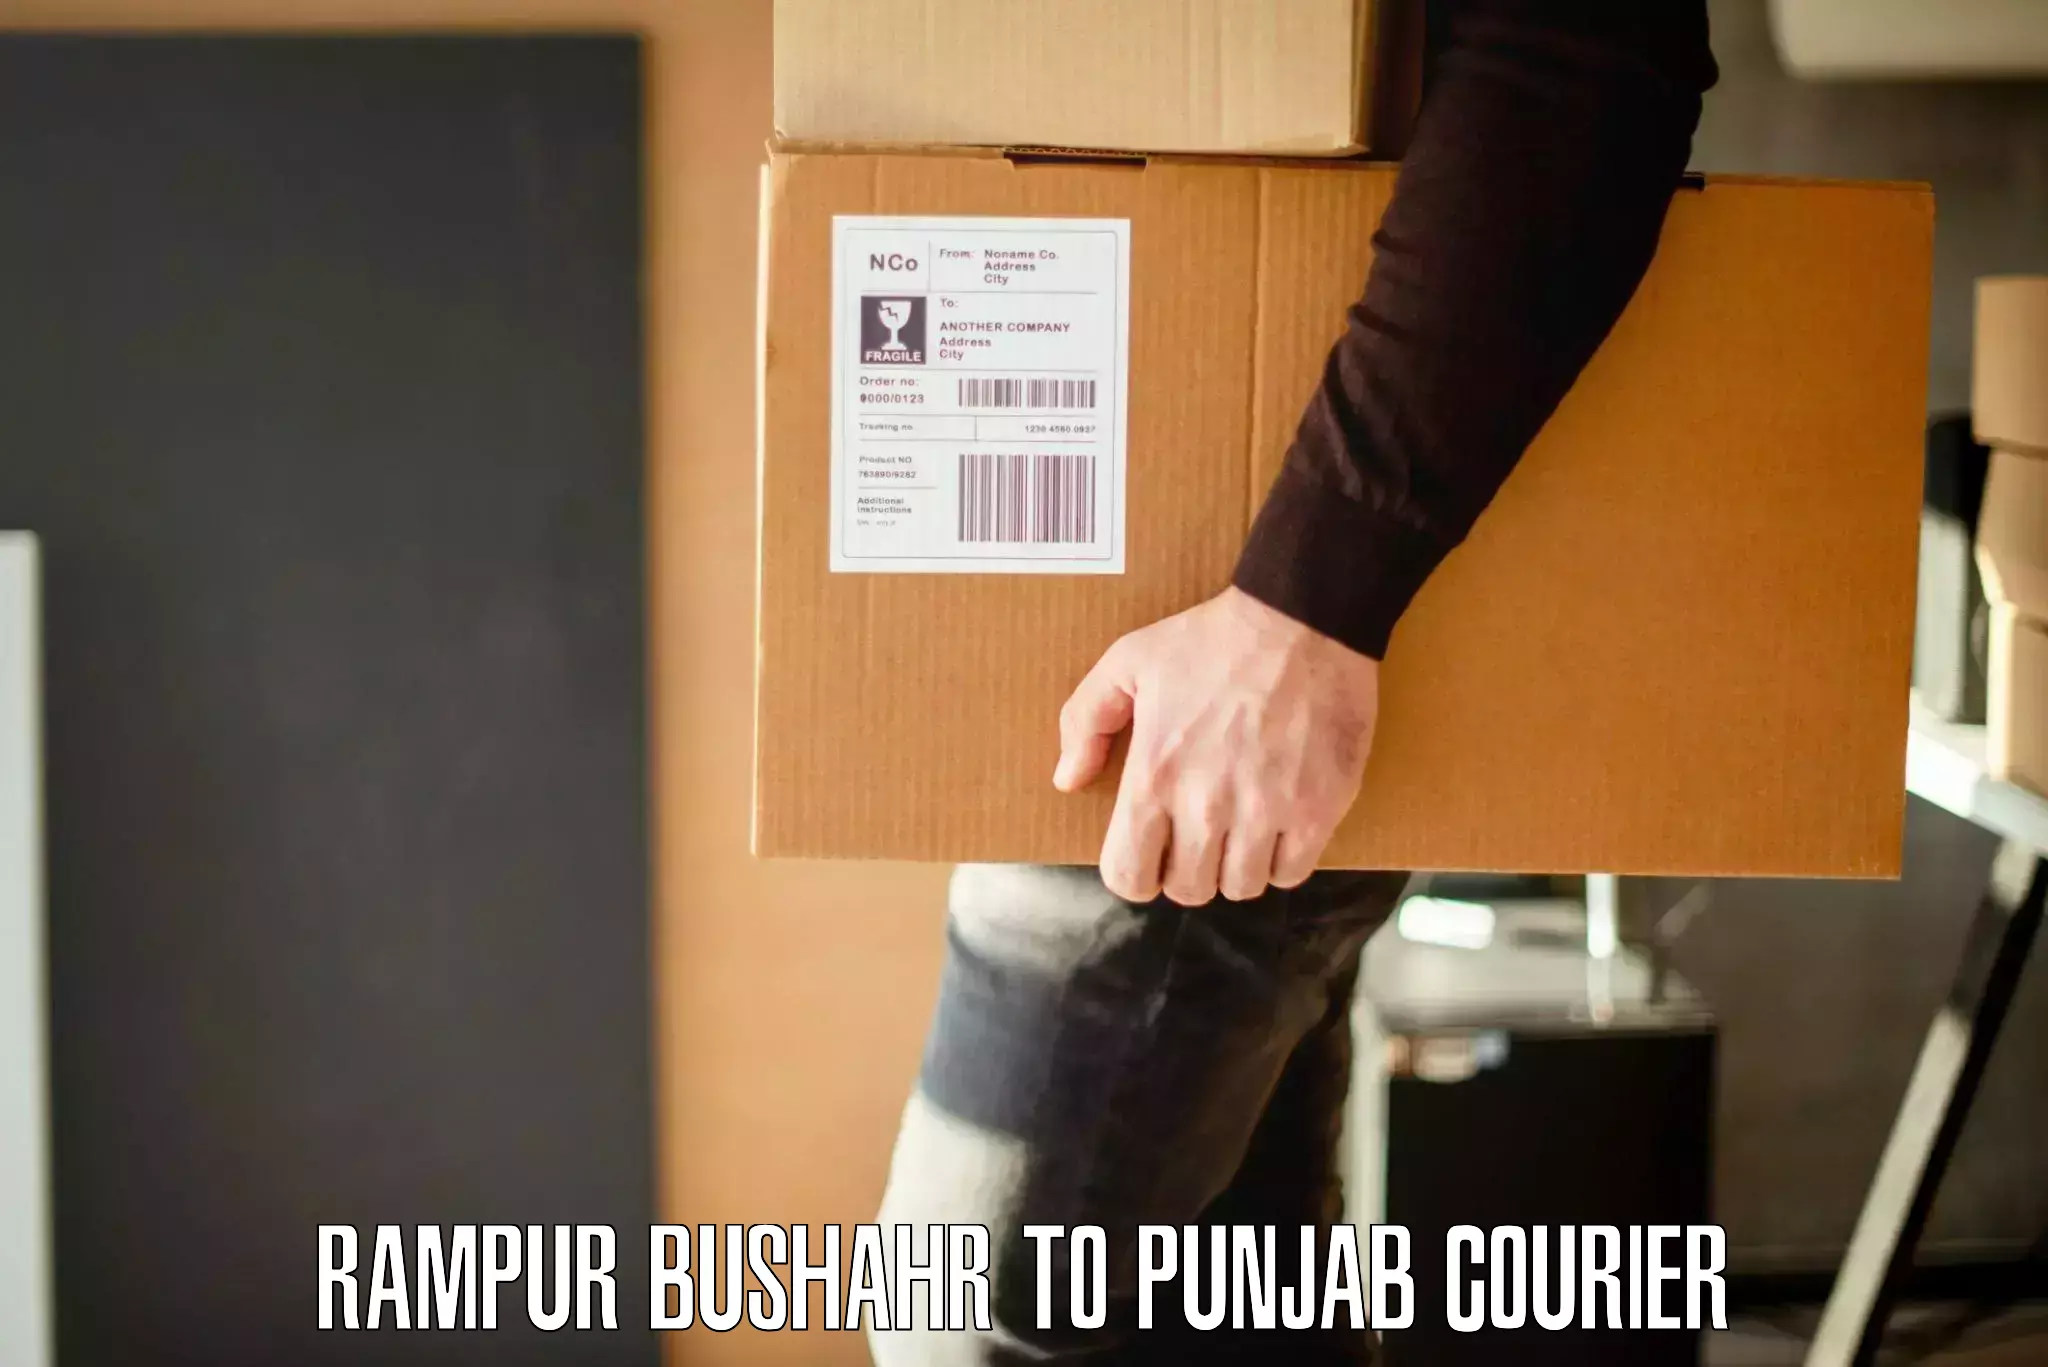 Specialized moving company Rampur Bushahr to Punjab